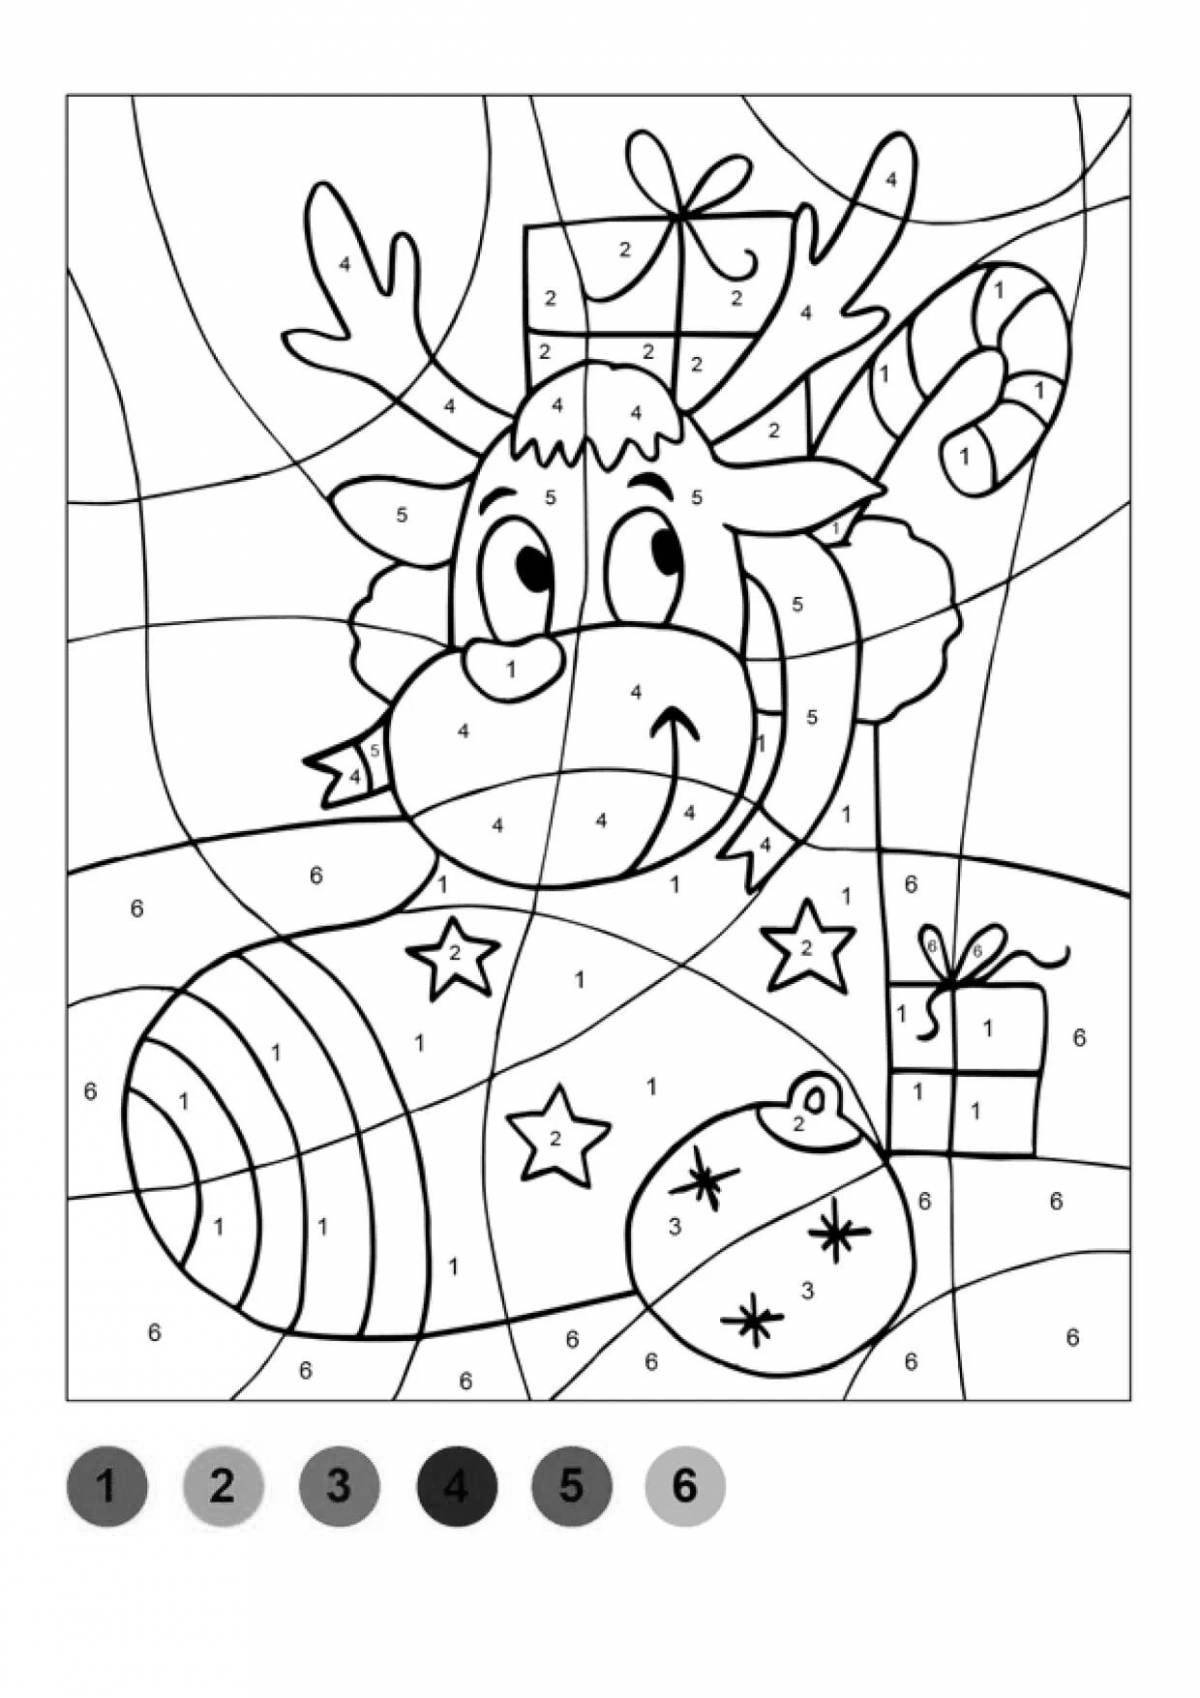 Charming winter coloring by numbers for kids 5-7 years old